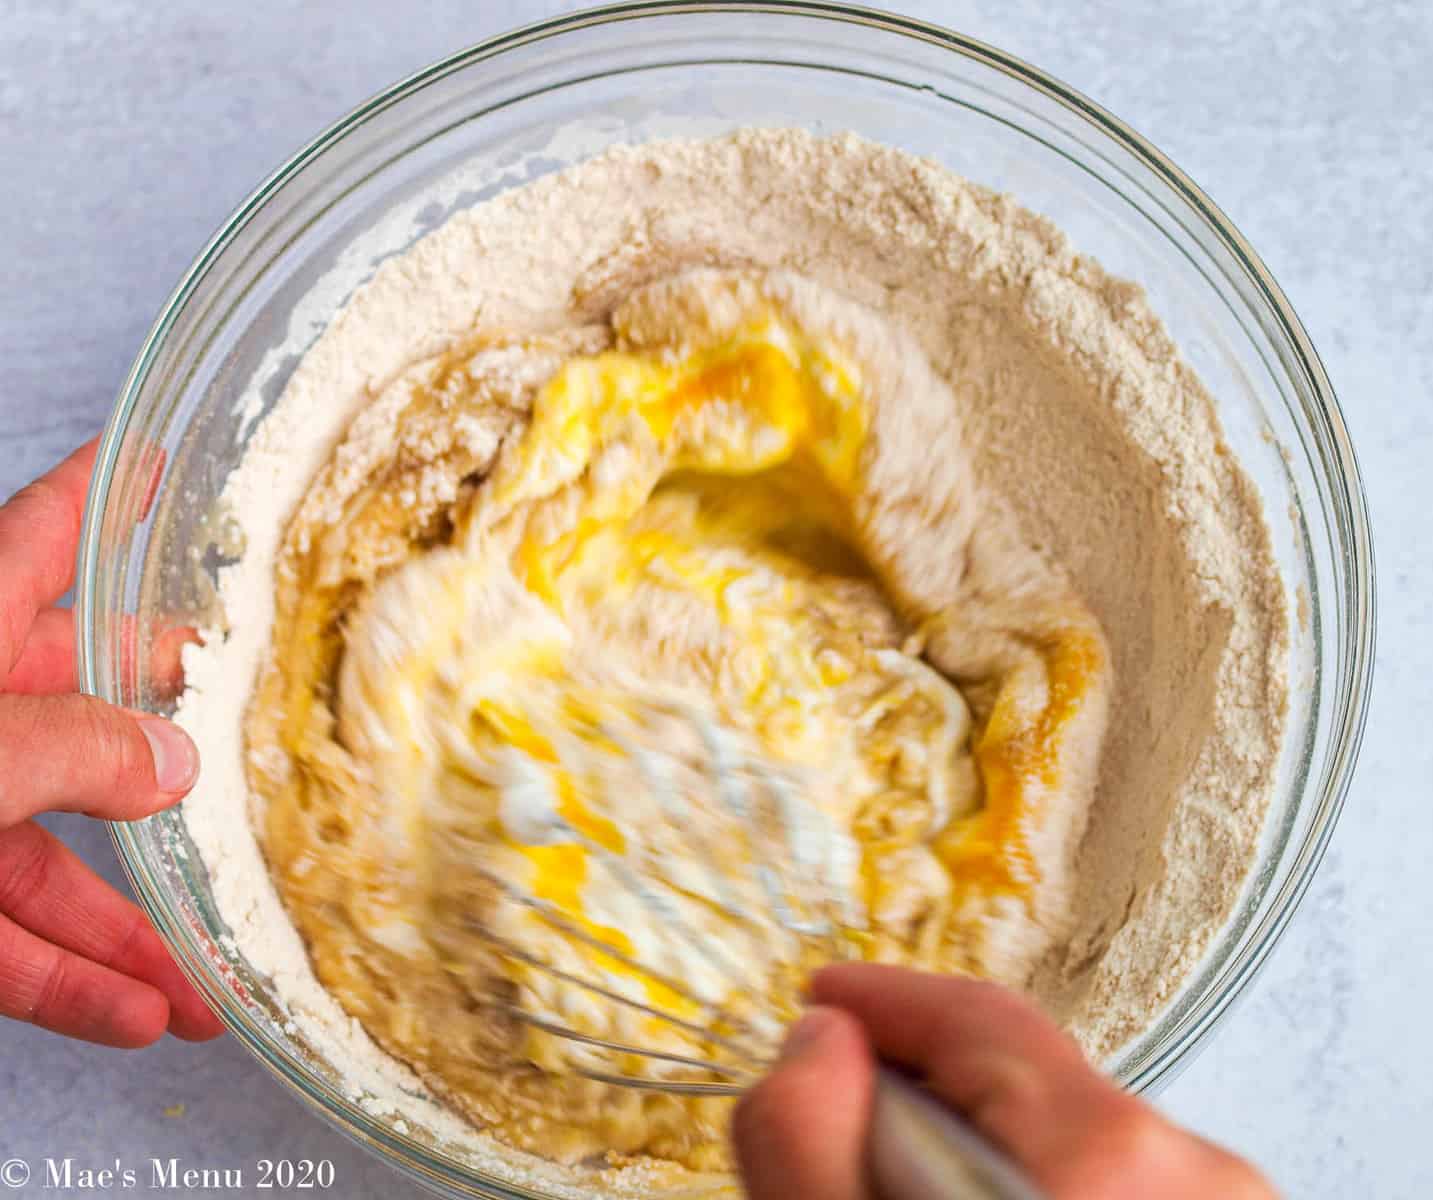 Mixing flour, lemon juice, lemon zest, sugar, melted butter, and eggs together in a large bowl with a whisk